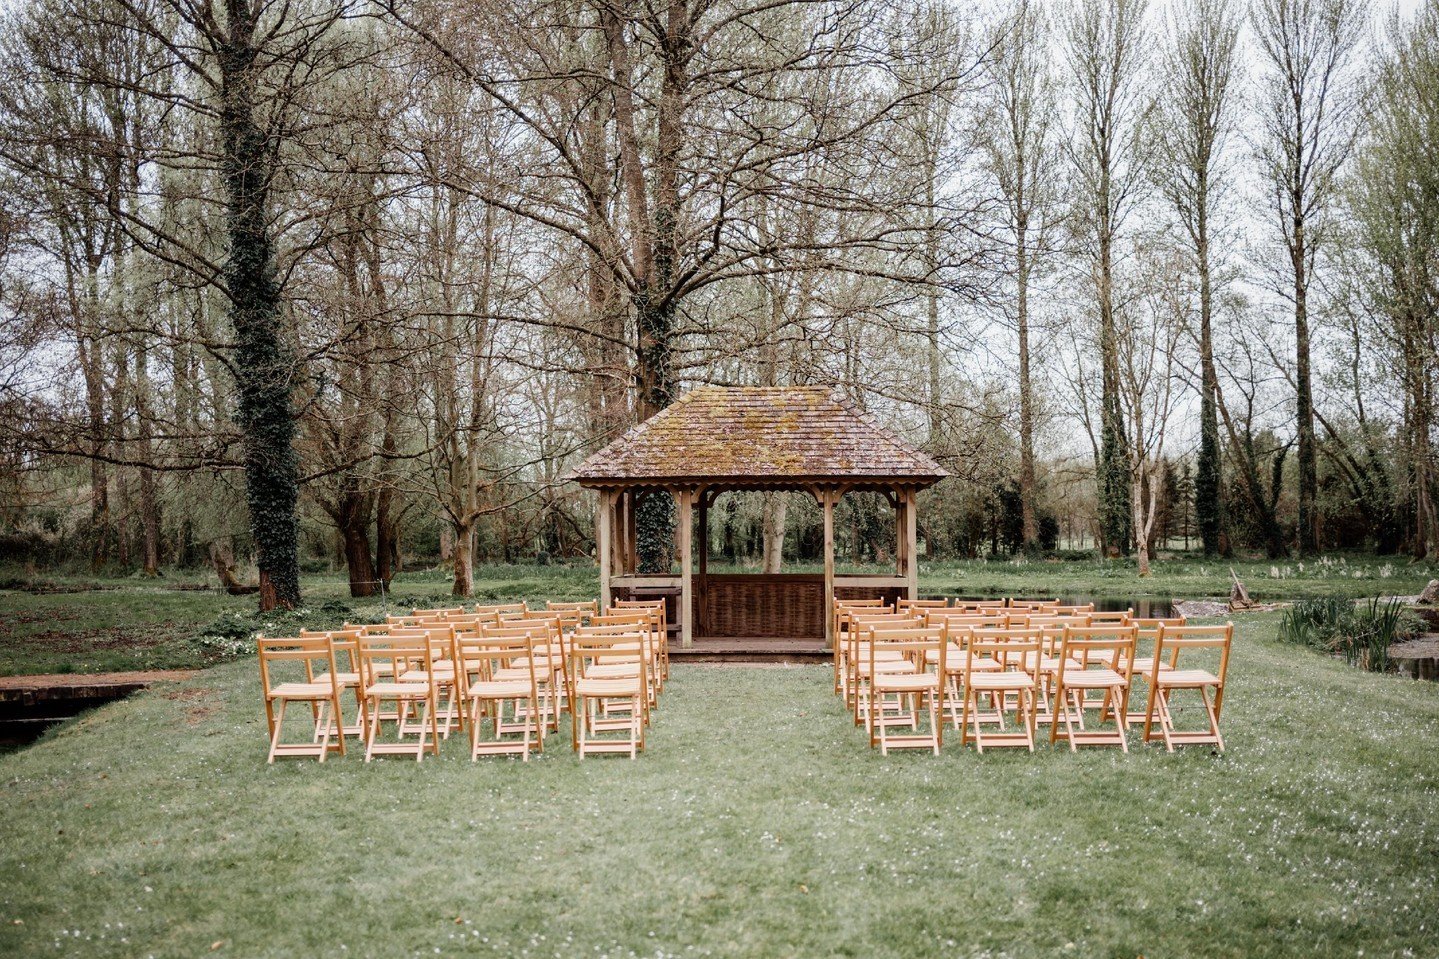 Our outdoor ceremony, just waiting for you to dress and style however you feel. 

Images by @tomwyatt.co

Concept and Planning: @tomwyatt.co / @kirstygreat.photo Photography: @tomwyatt.co / @kirstygreat.photo
Venue: @watersedgewedding
On-the-day coor